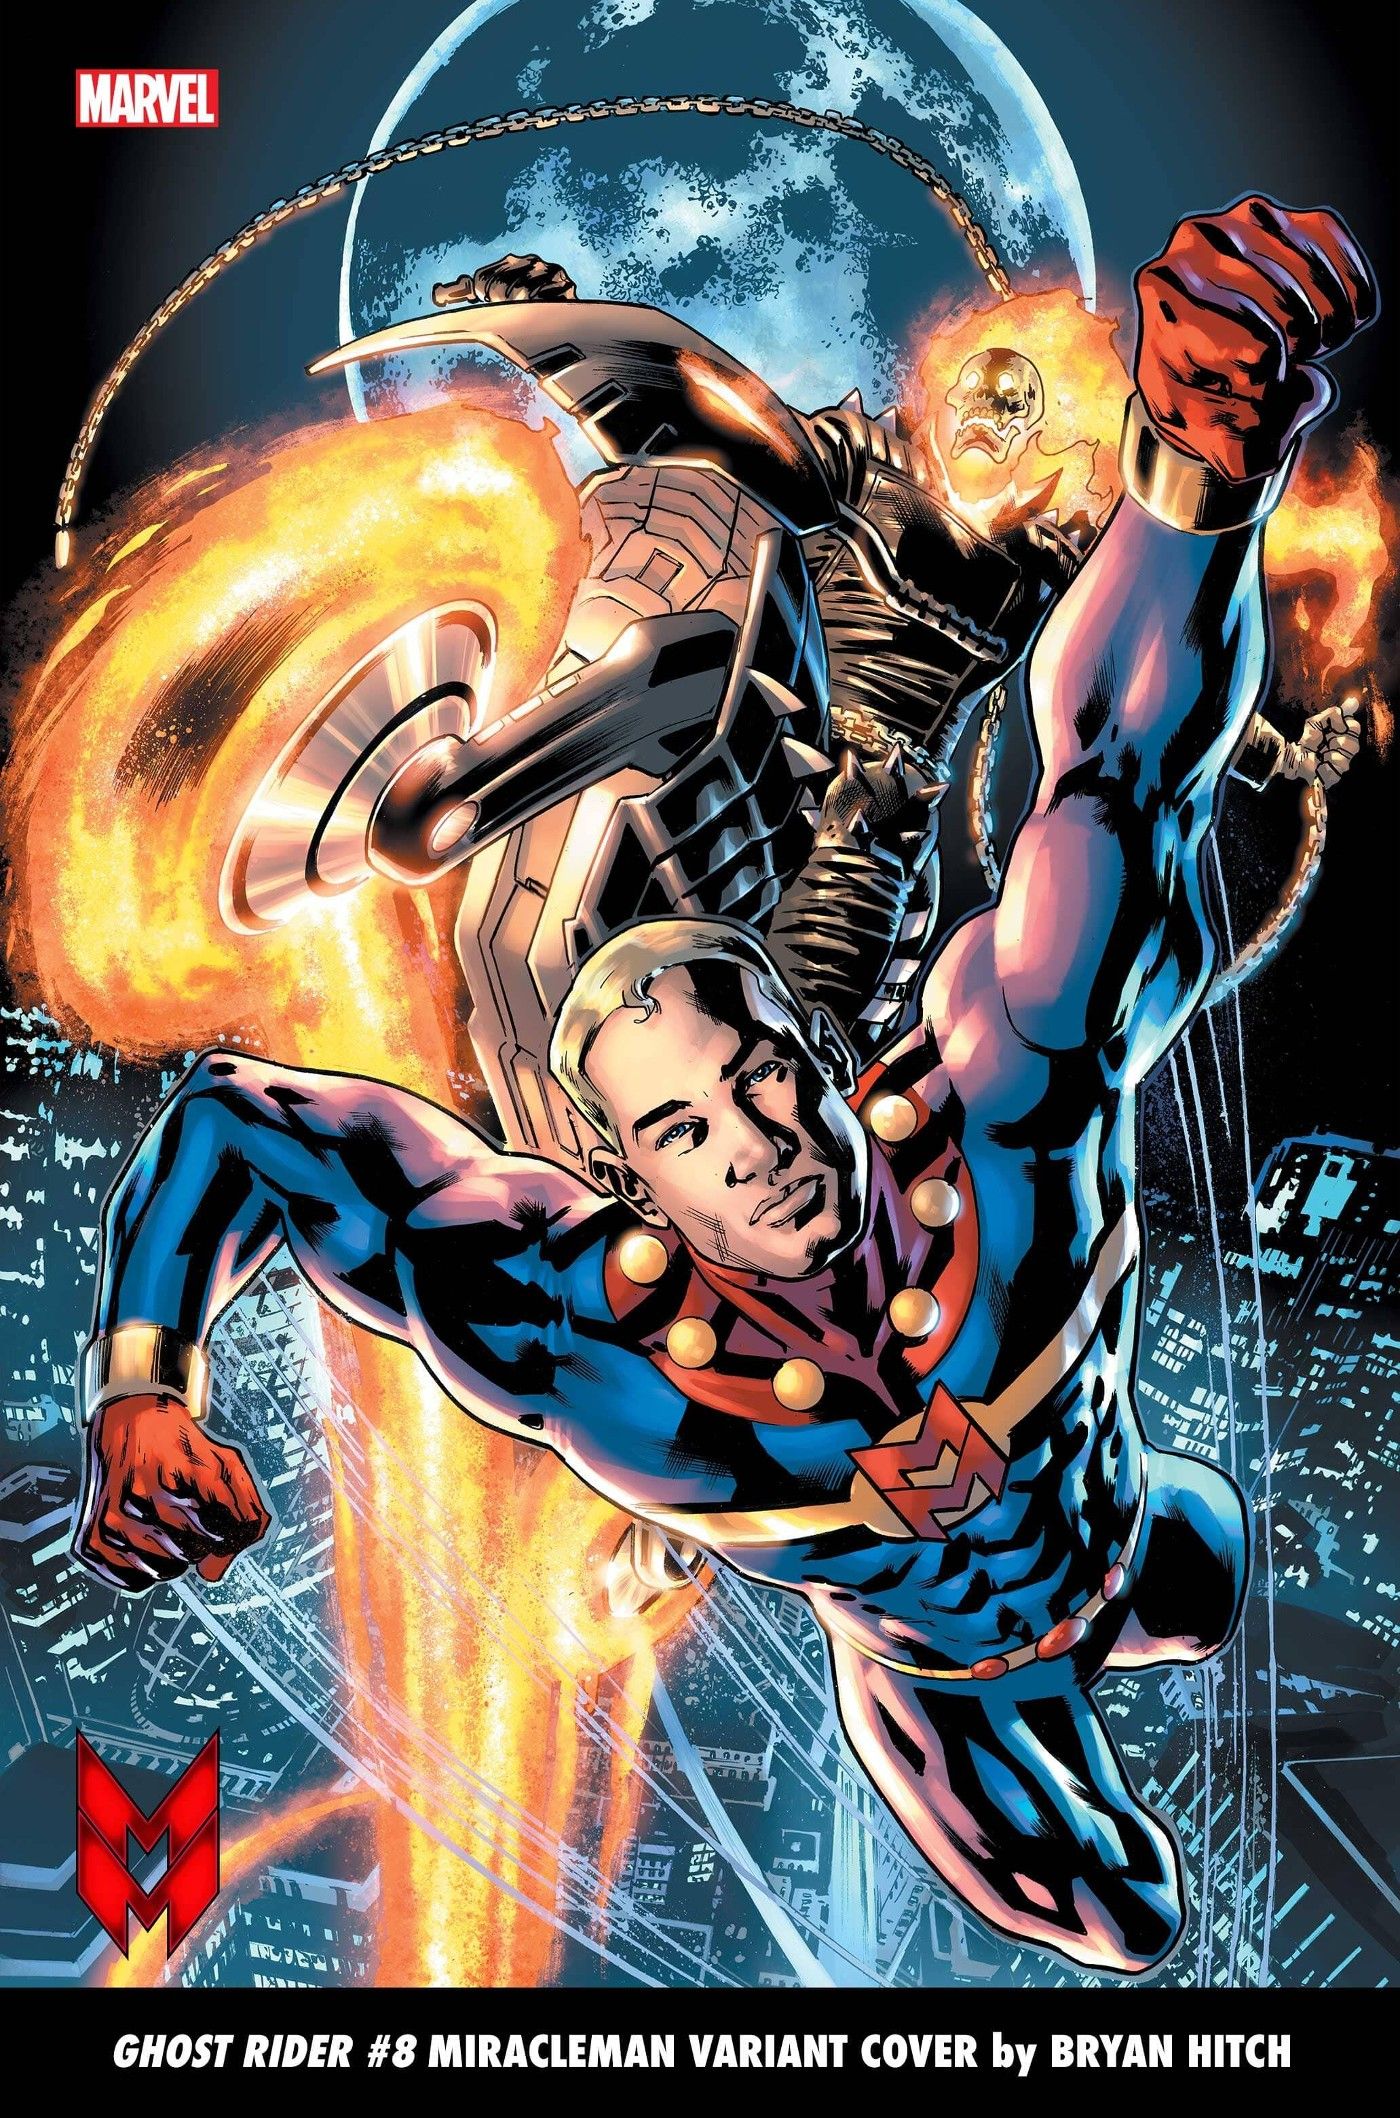 GHOST RIDER 8 MIRACLEMAN VARIANT COVER by BRYAN HITCH